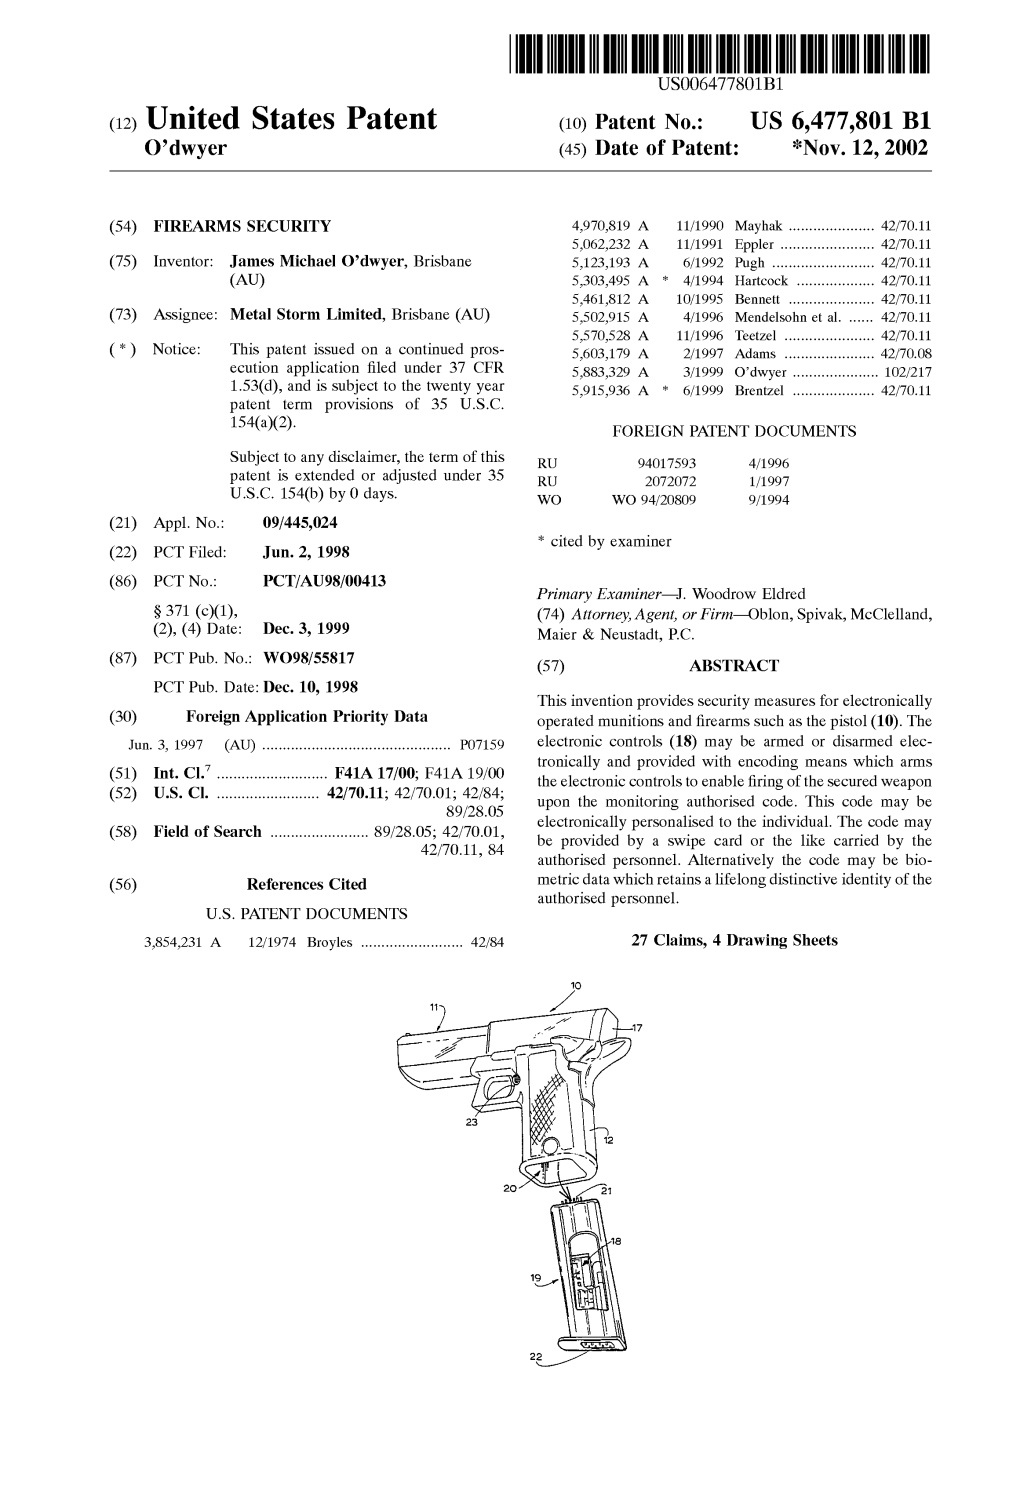 (12) United States Patent (10) Patent No.: US 6,477,801 B1 O'dwyer (45) Date of Patent: *Nov